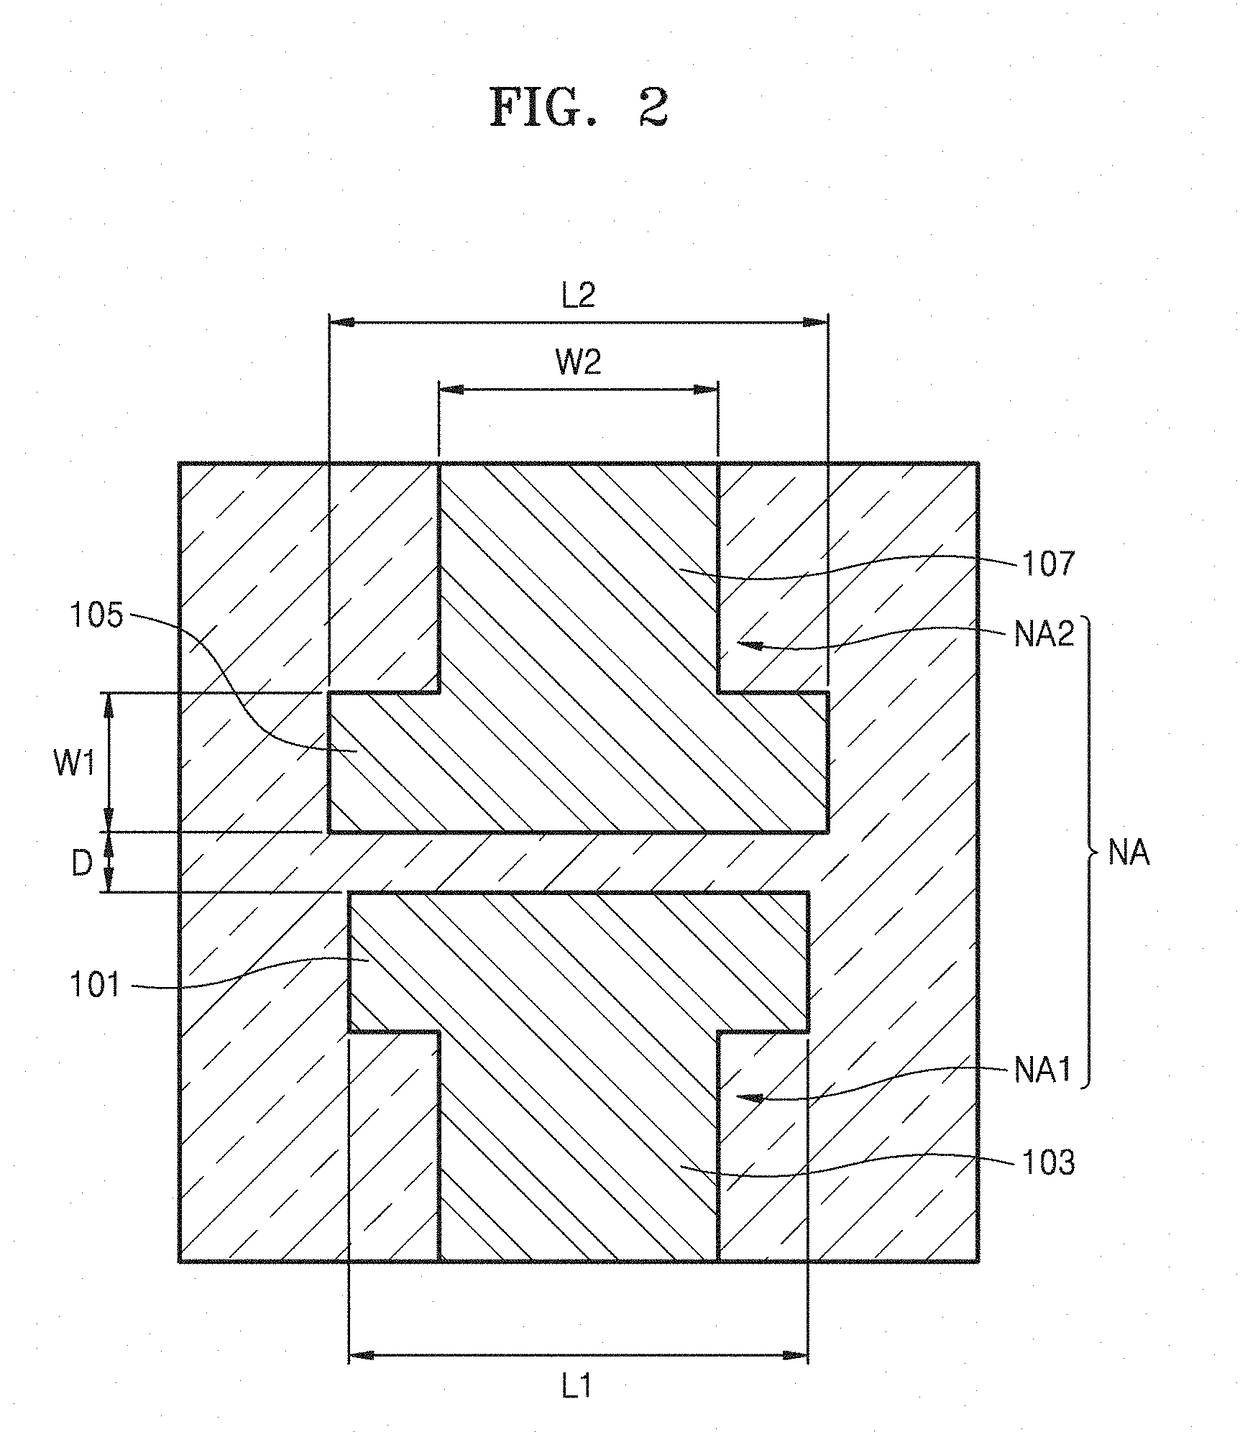 Optical modulating device, beam steering device, and system employing the same